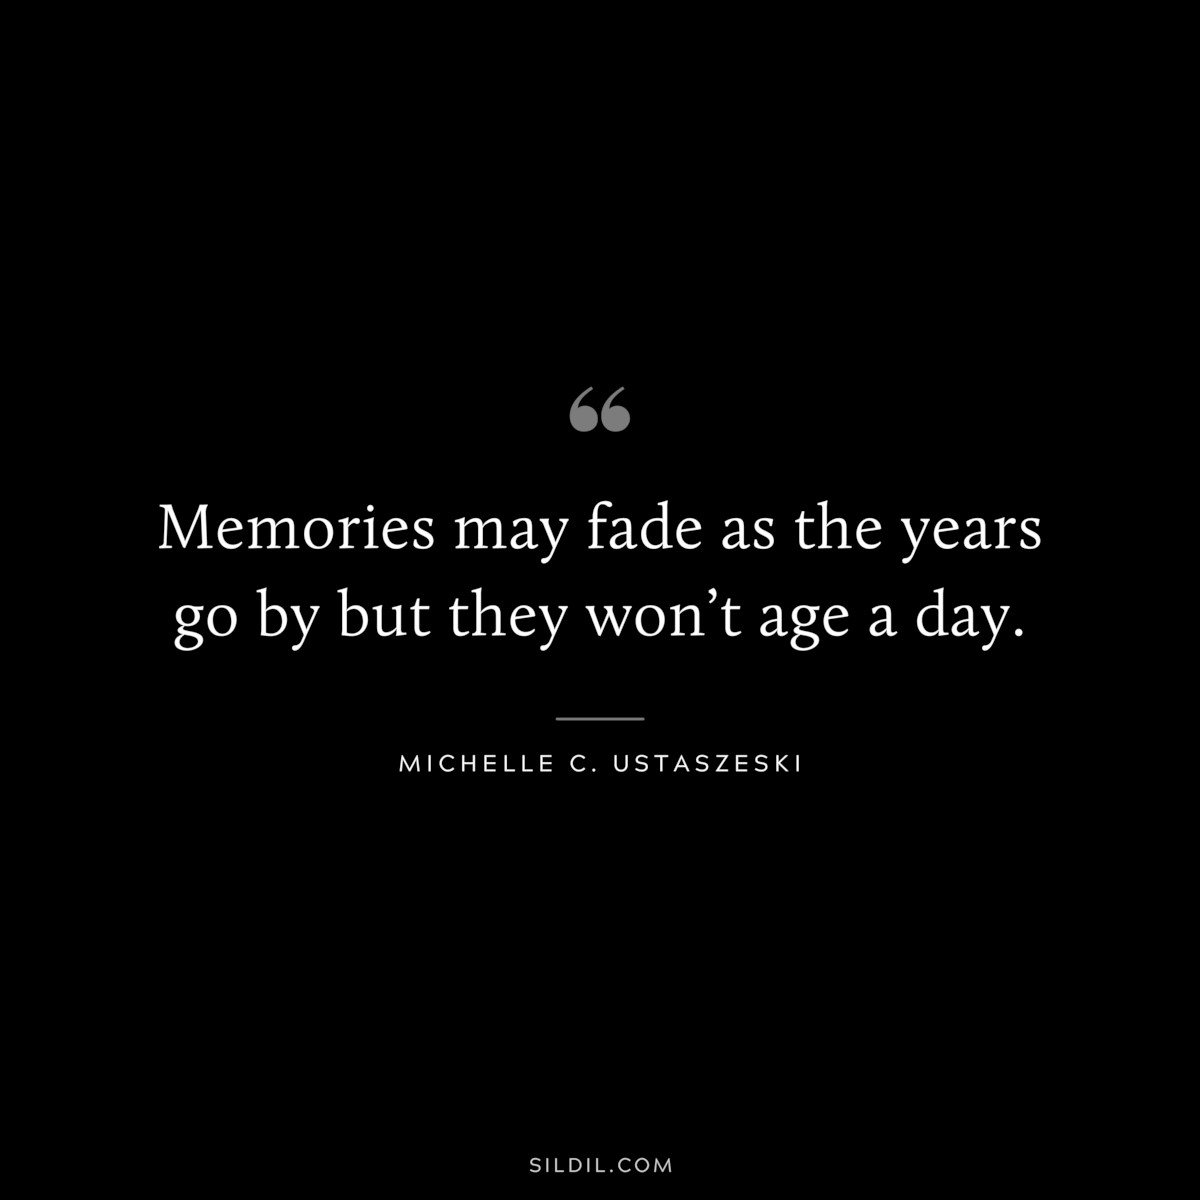 Memories may fade as the years go by but they won’t age a day. ― Michelle C. Ustaszeski